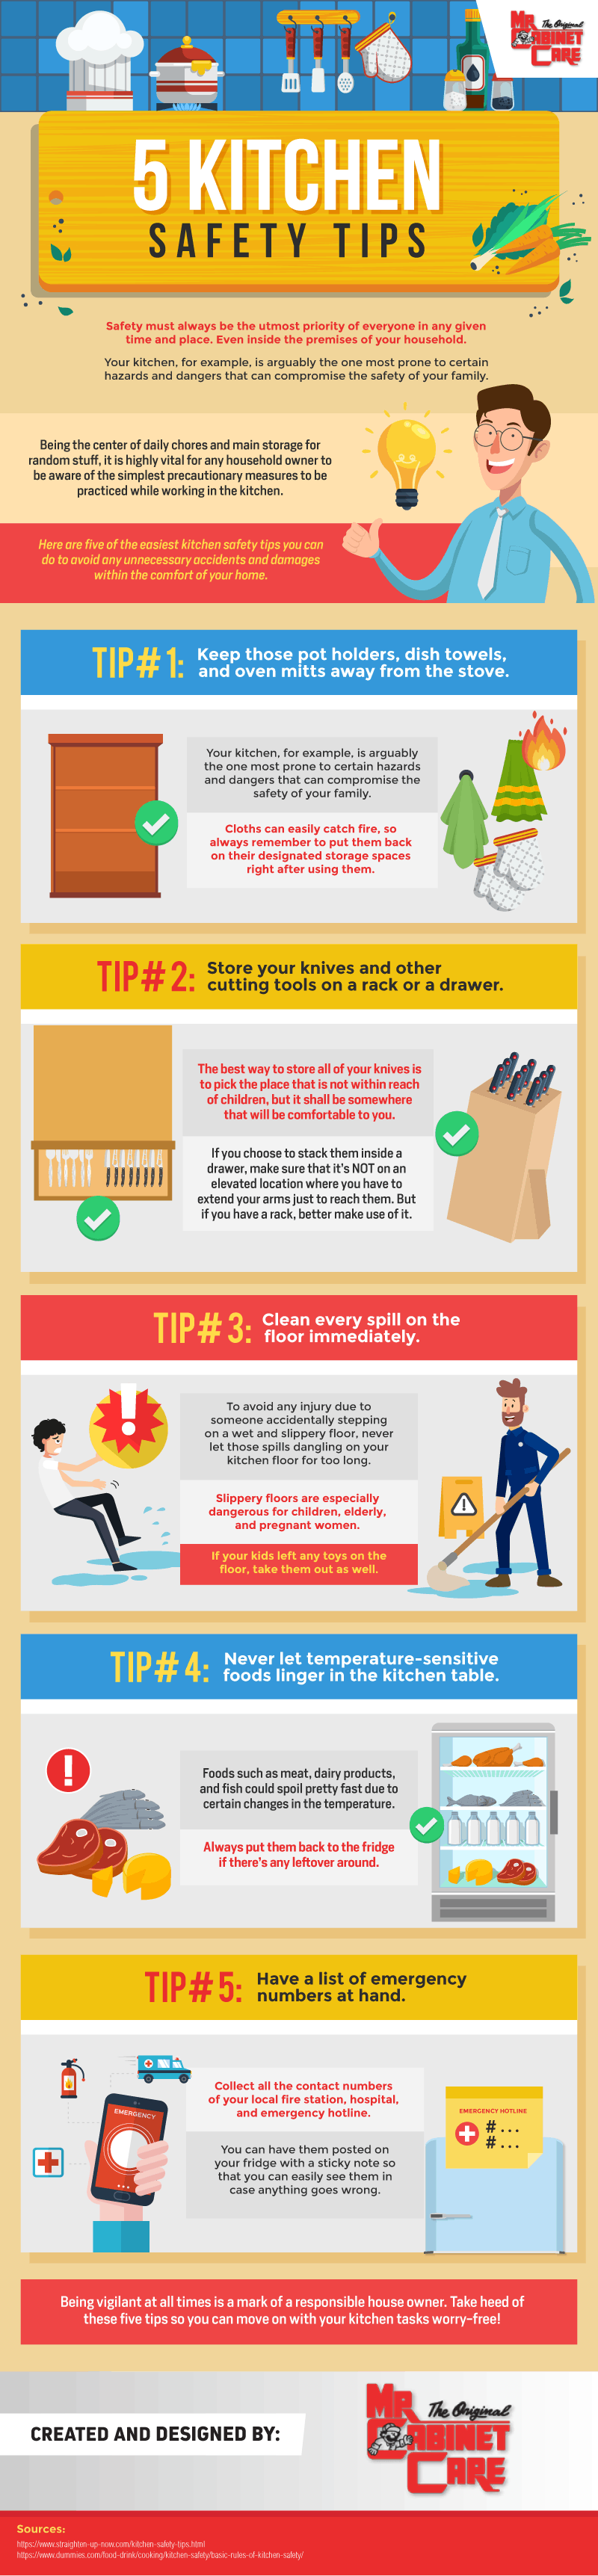 5 Kitchen Safety Tips infographic